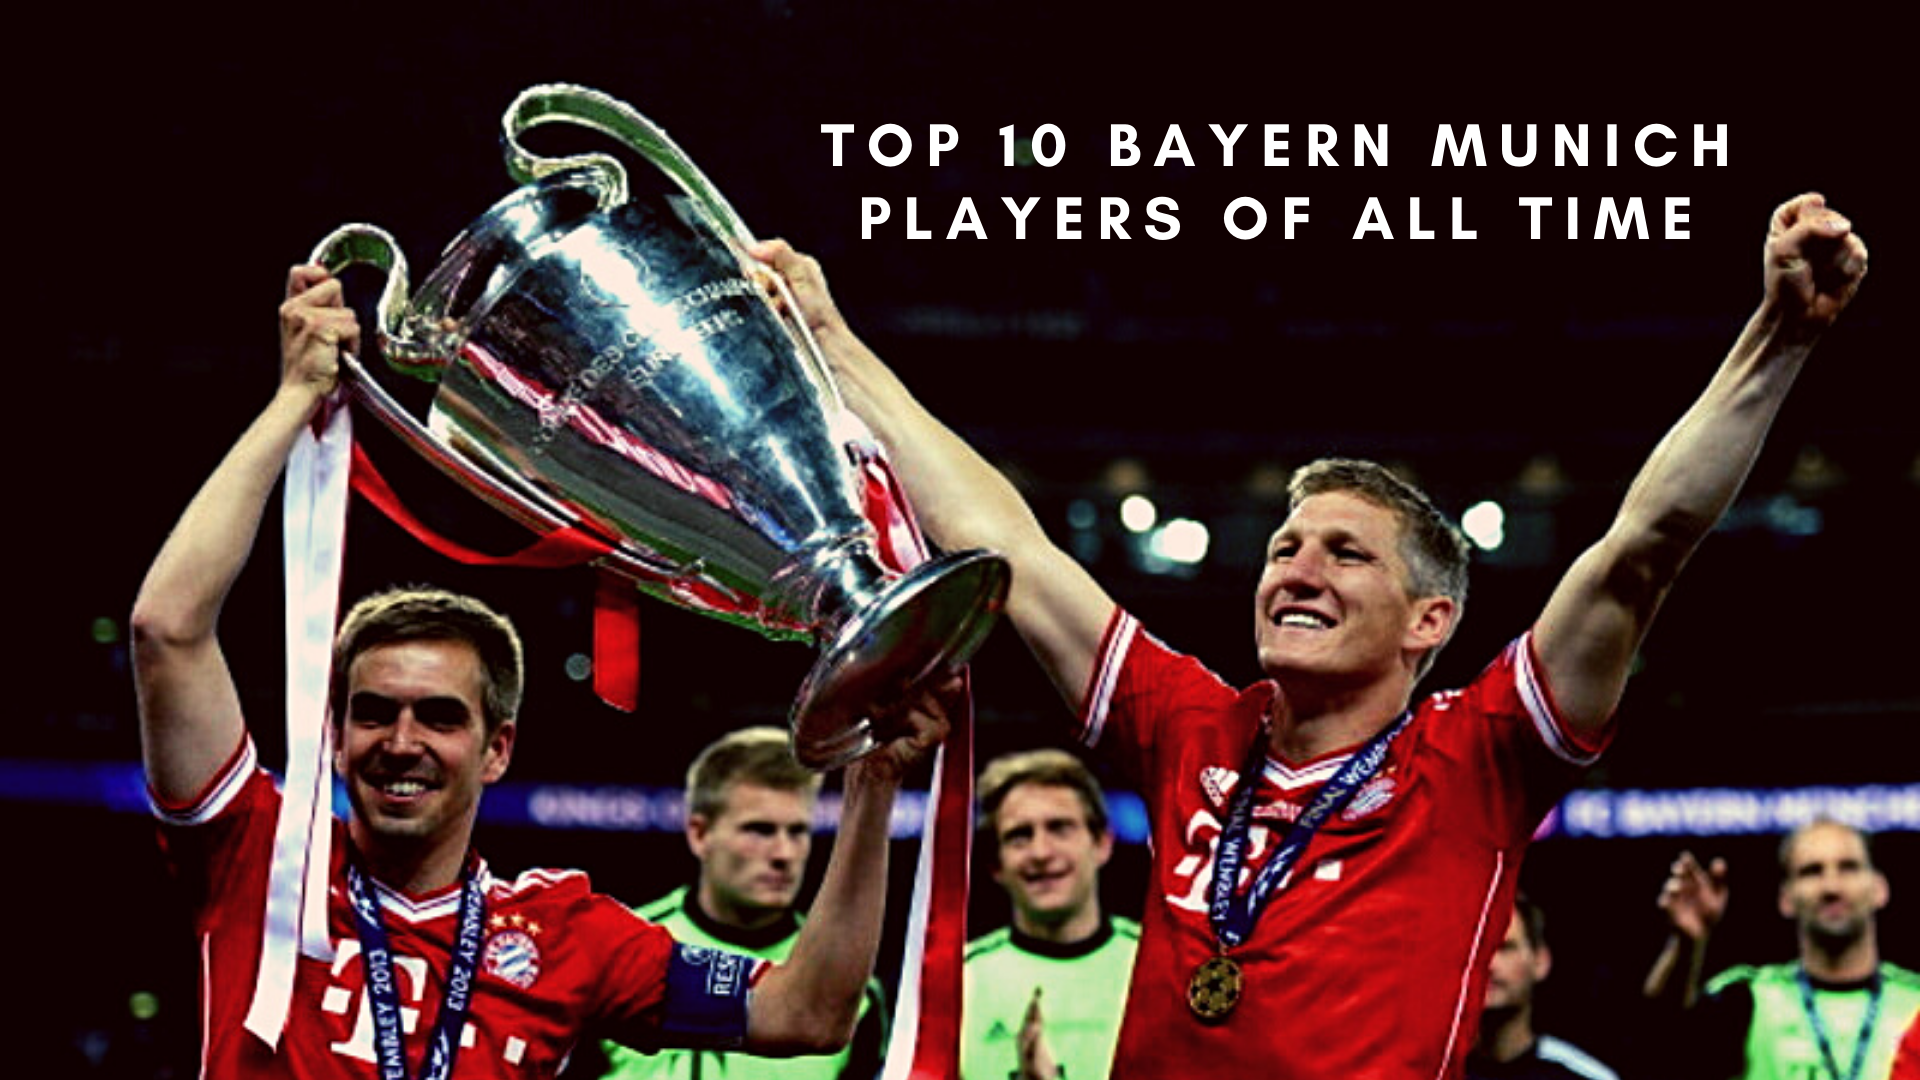 Here is the list of top 10 Bayern Munich players of all time. (Credit: Laurence Griffiths/Getty Images)